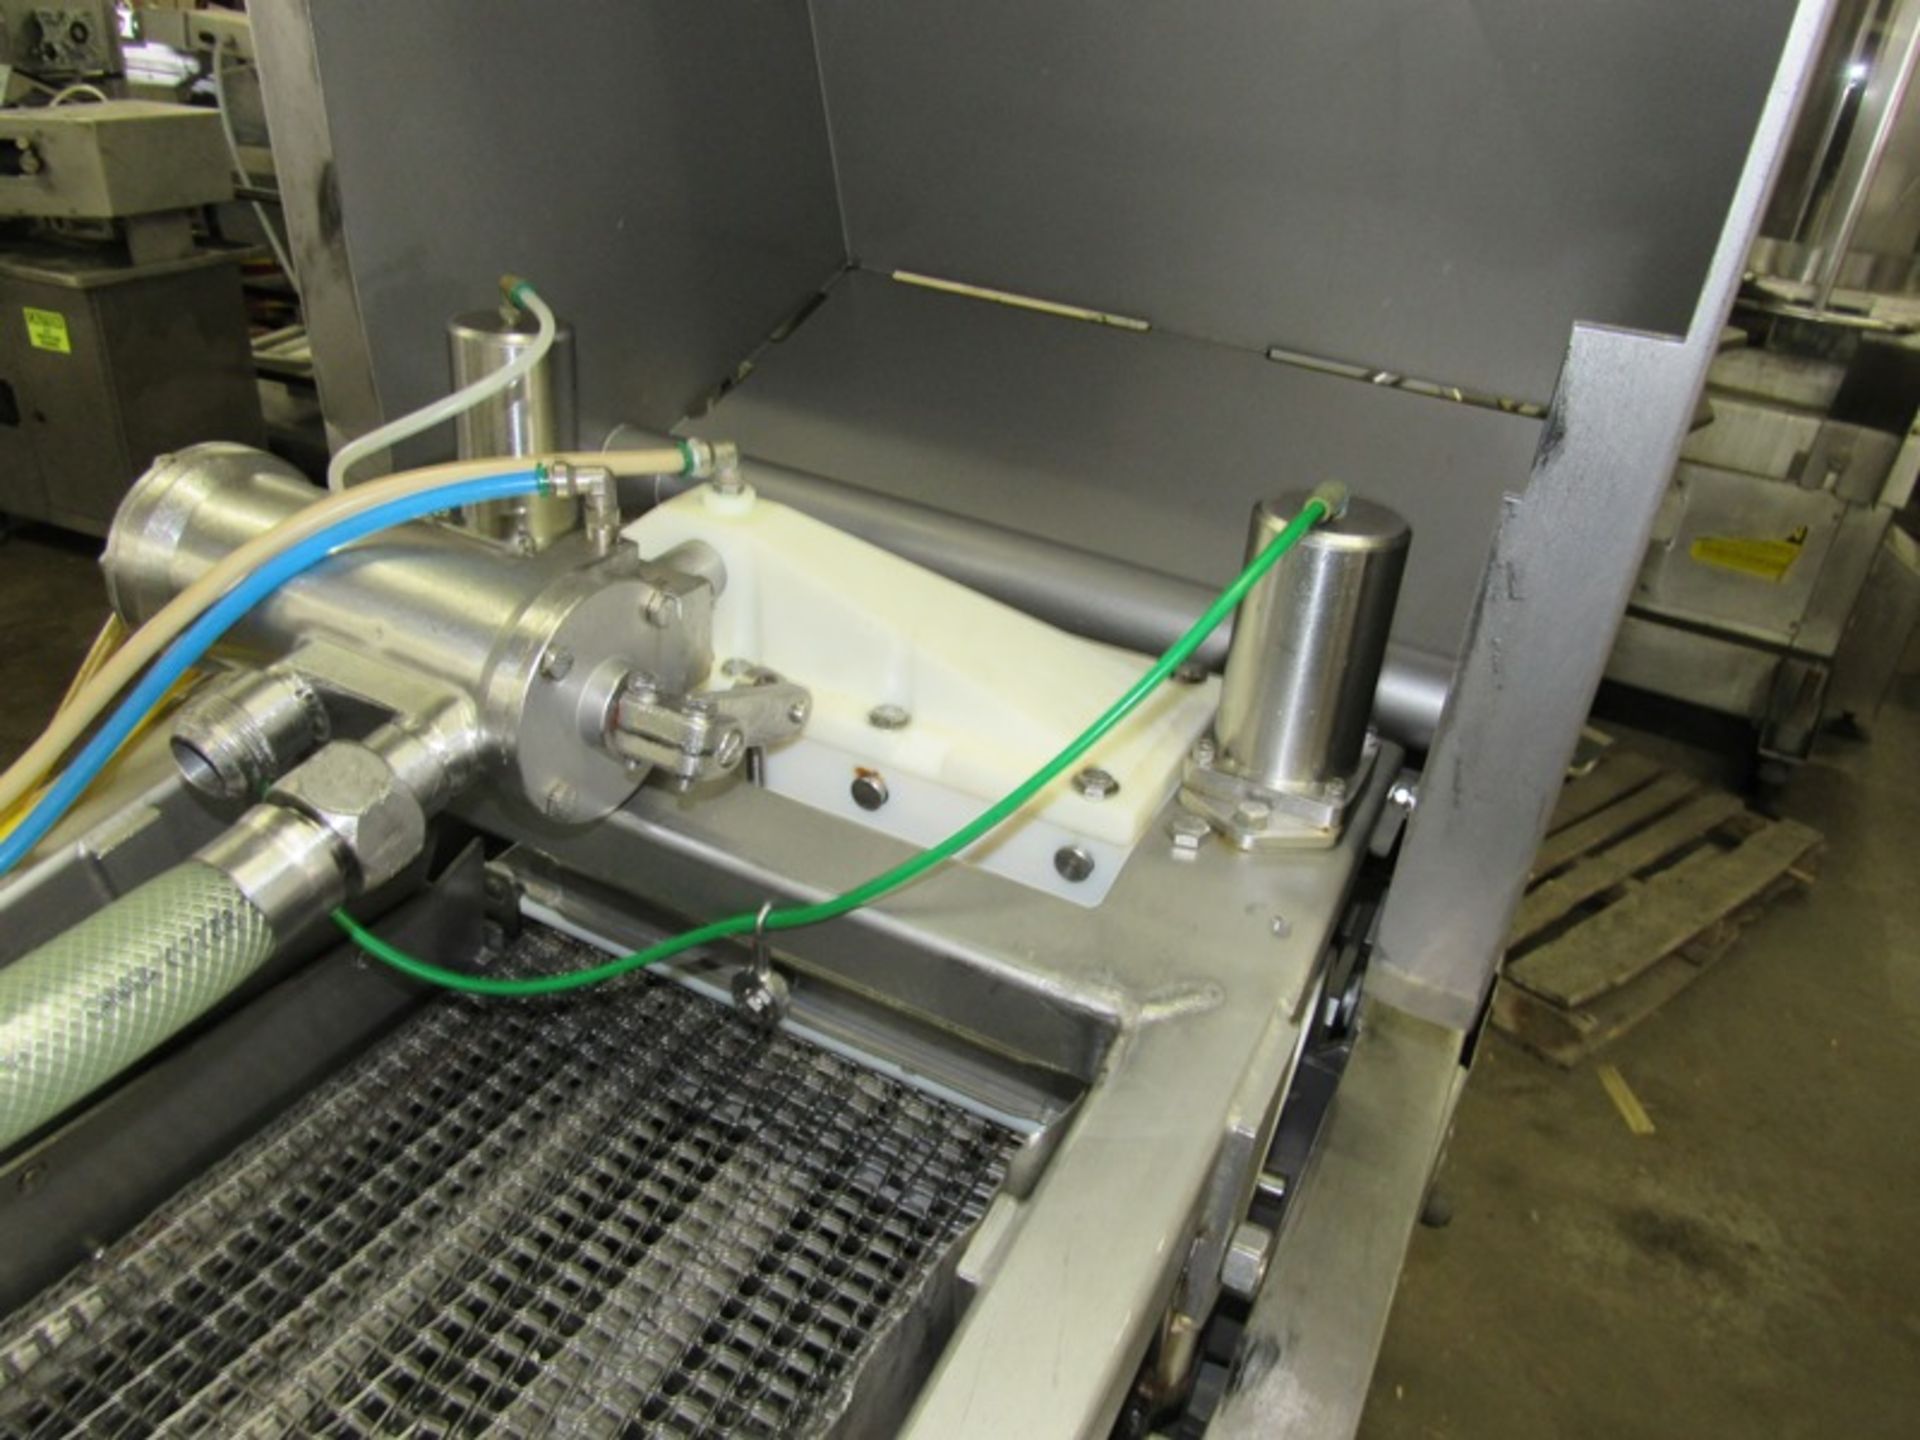 Townsend Mdl. 1450 Injector, 170 needle, 14" W X 6' H stainless steel belt conveyor with stainless - Image 8 of 18